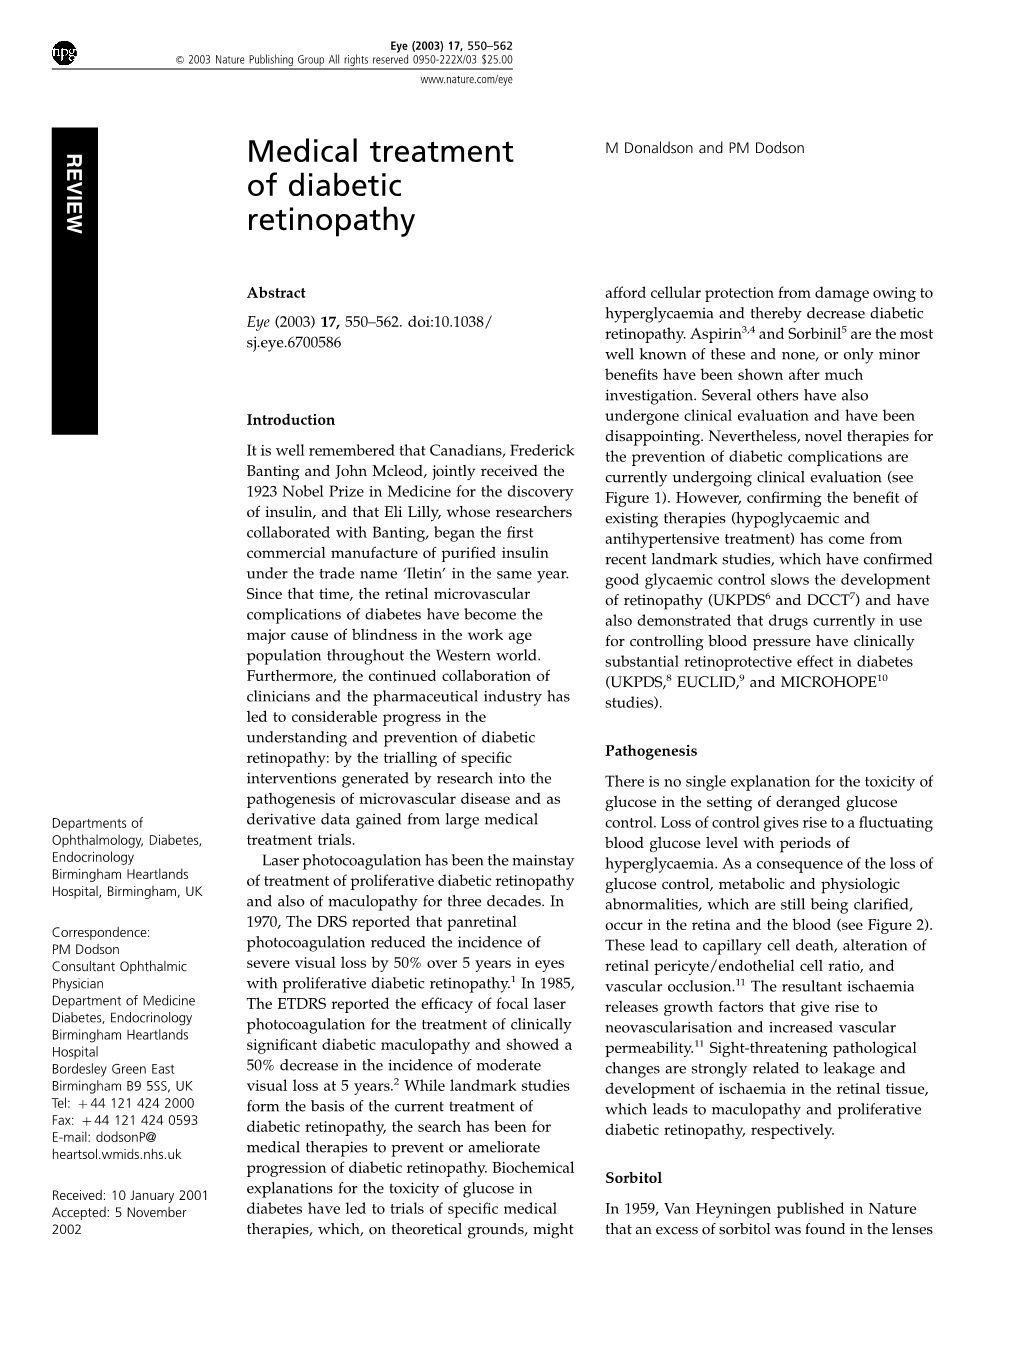 Medical Treatment of Diabetic Retinopathy M Donaldson and PM Dodson 551